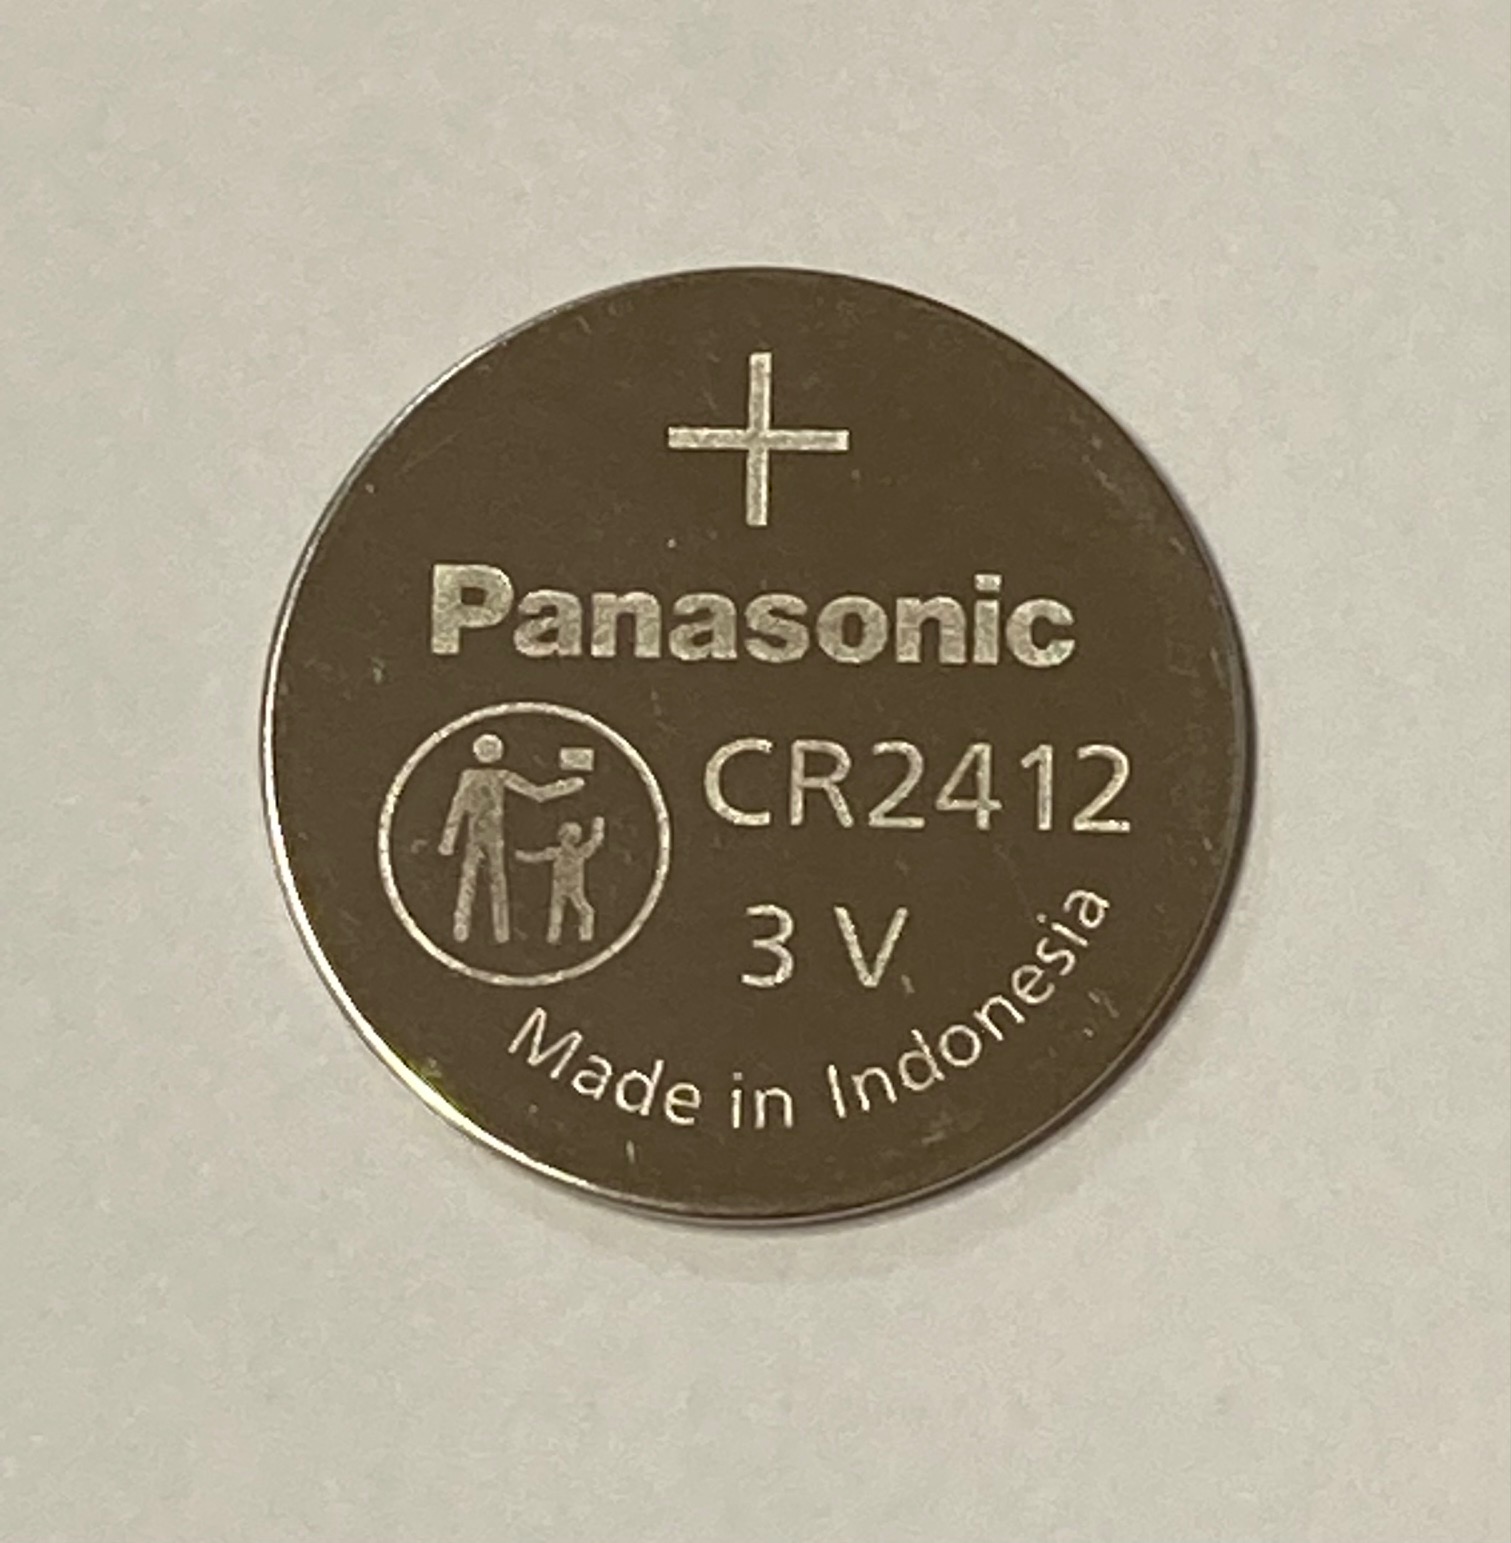  free shipping Panasonic made CR2412 lithium button battery * Lexus * Crown * Majesta and so on *